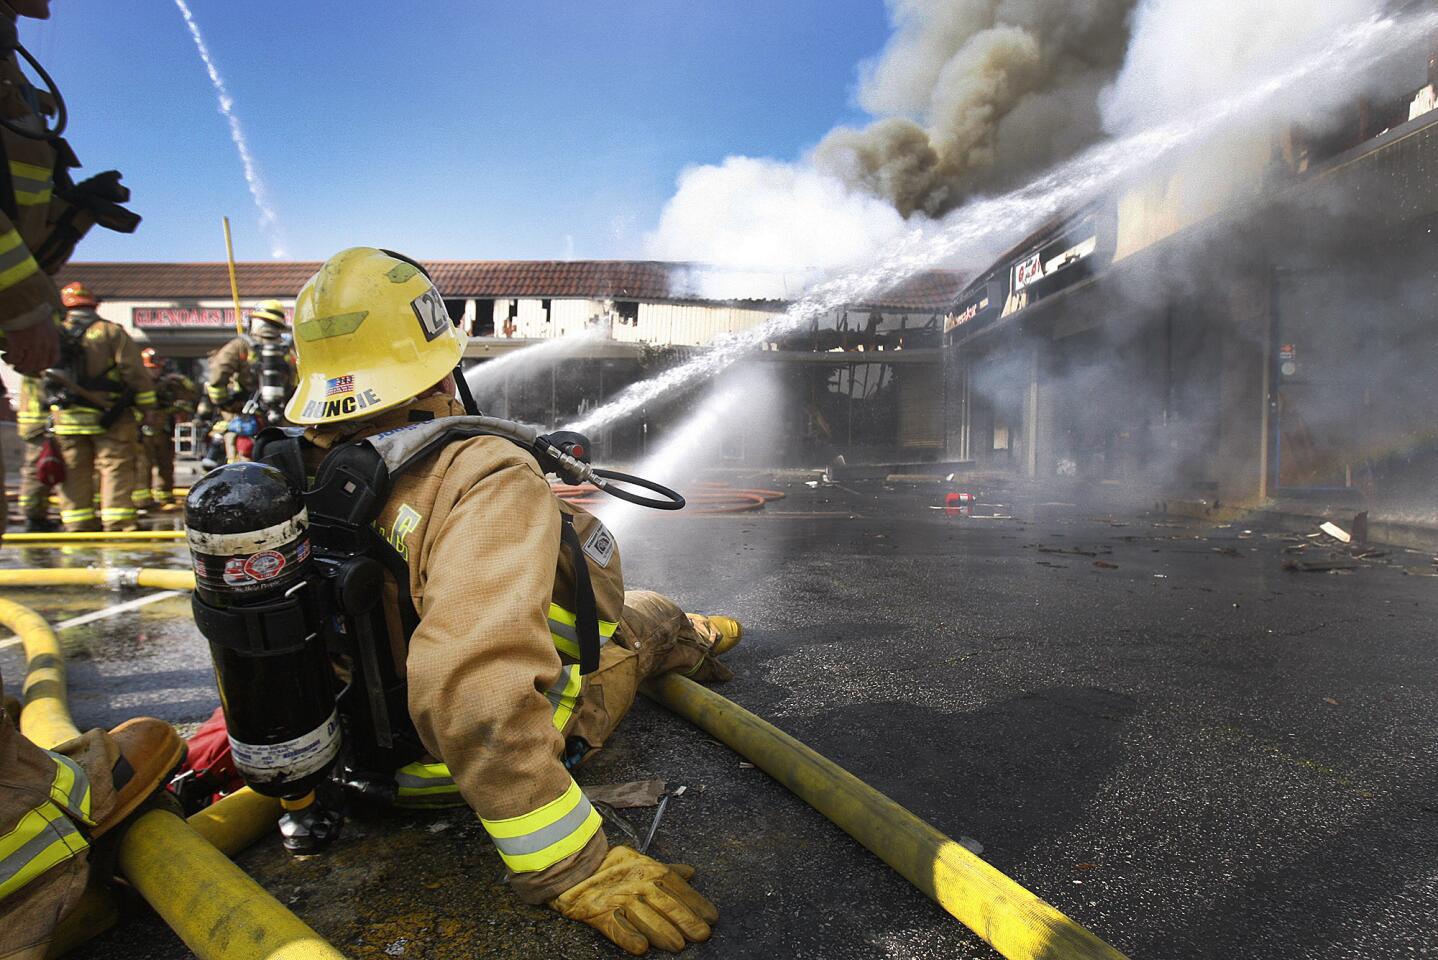 A fireman from Glendale station 23 holds a stream from line of hose steady on a hot spot at the scene of an intense fire in a strip mall on the corner of Howard Street and Glendale Blvd. in Glendale on Monday, February 10, 2014.